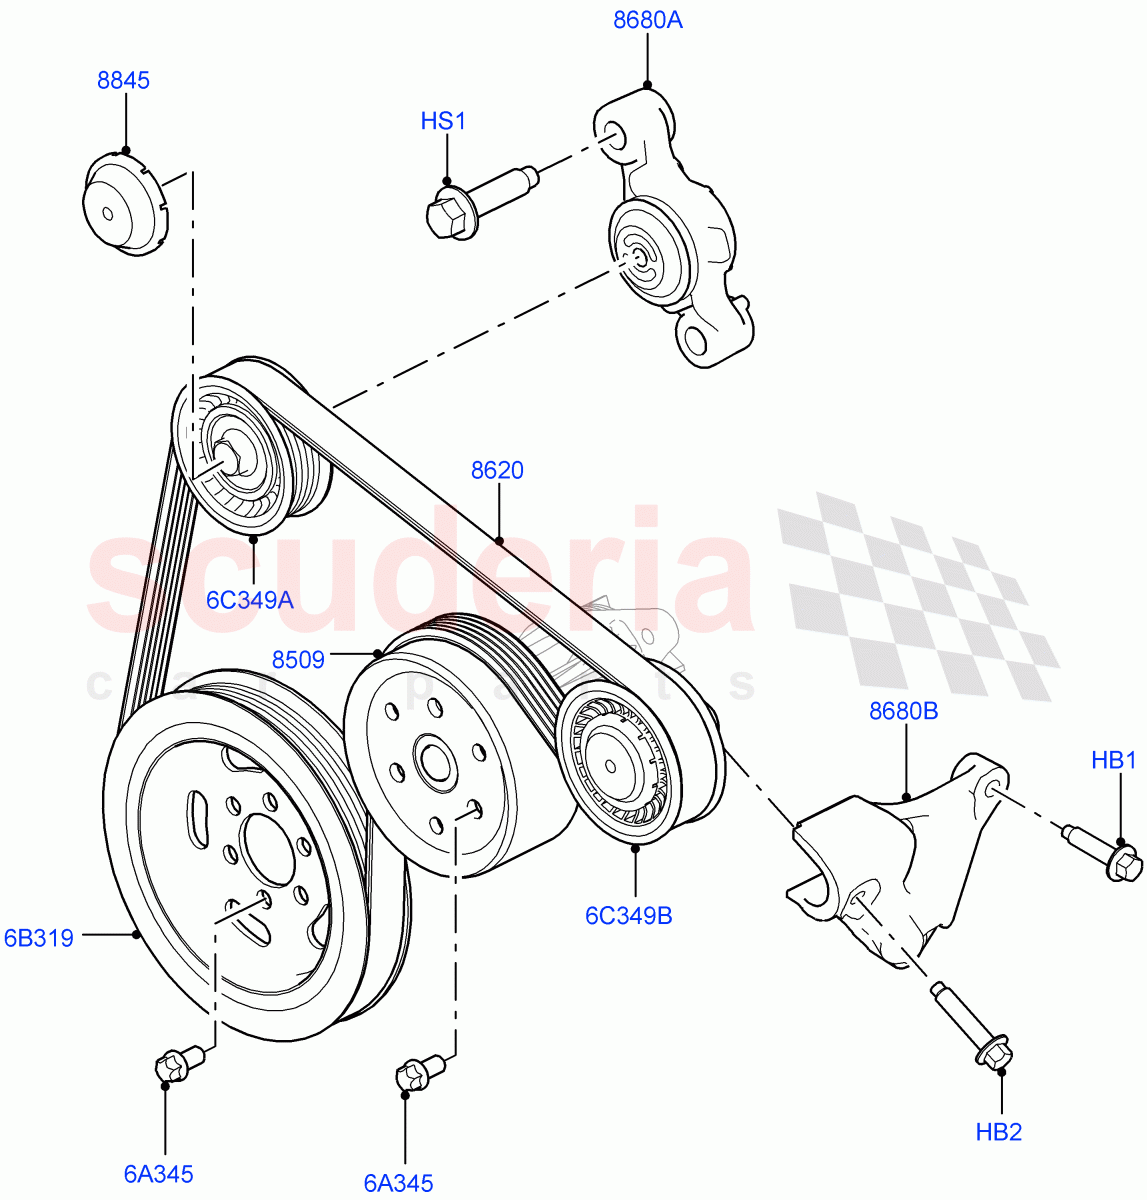 Pulleys And Drive Belts(Front)(3.0 V6 D Gen2 Twin Turbo,8 Speed Auto Trans ZF 8HP70 HEV 4WD,3.0 V6 Diesel Electric Hybrid Eng,3.0 V6 D Gen2 Mono Turbo)((V)FROMFA000001) of Land Rover Land Rover Range Rover (2012-2021) [3.0 Diesel 24V DOHC TC]